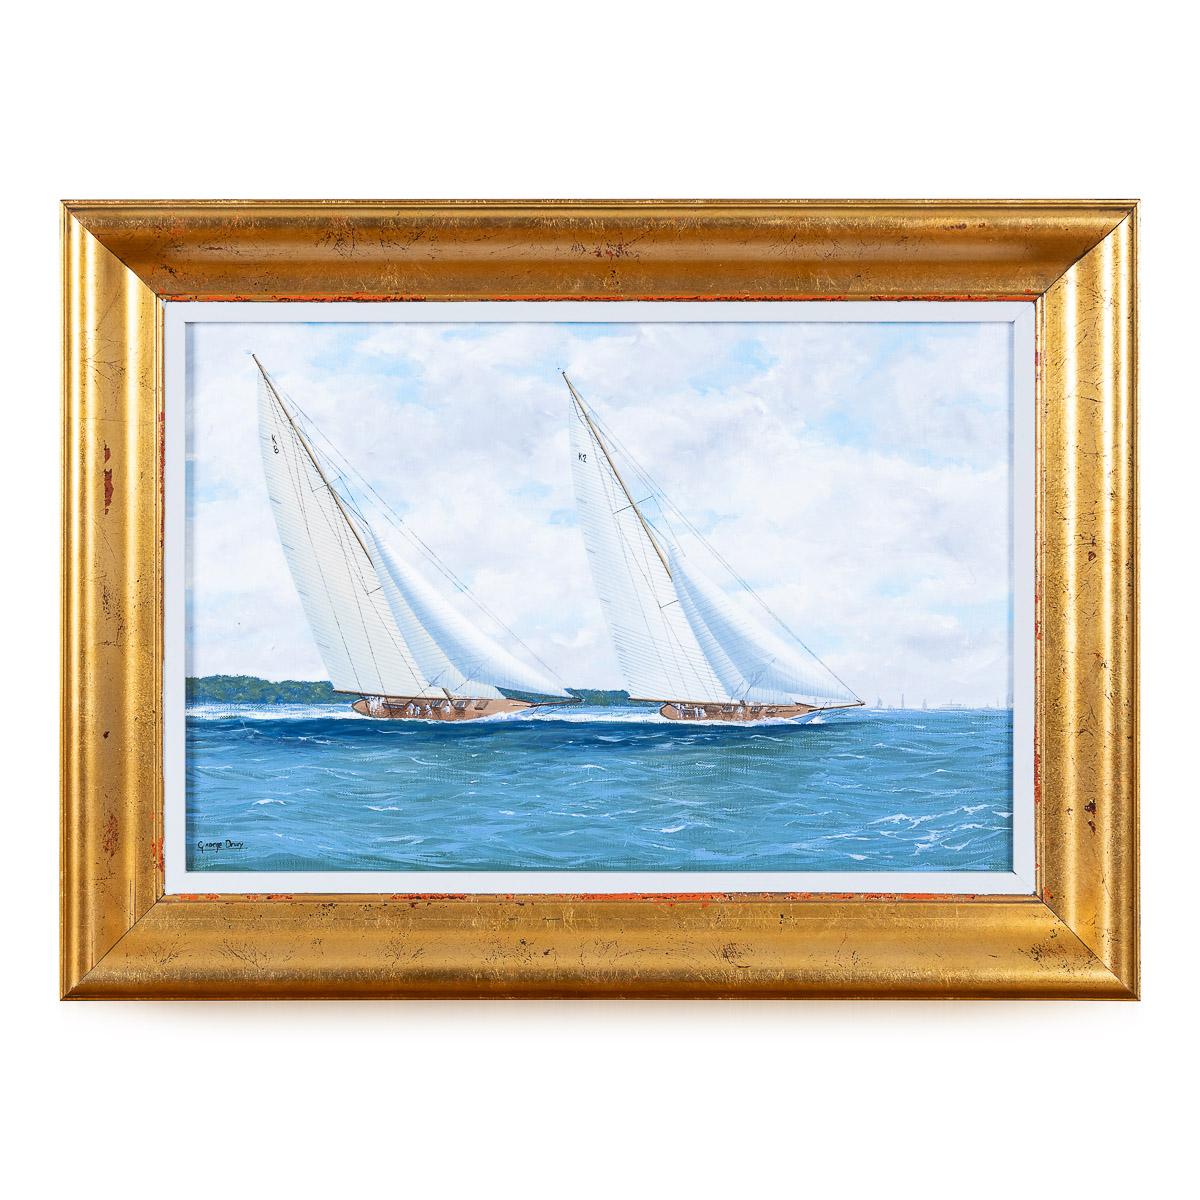 Pair of oil on board paintings of Classic Racing Yachts, signed by George Drury (British 1950-): 'Britannia and Yankee Duelling on the Solent 1935', and 'Candida and Astra, The West Country Regatta 1935'.

CONDITION
In great condition - no signs